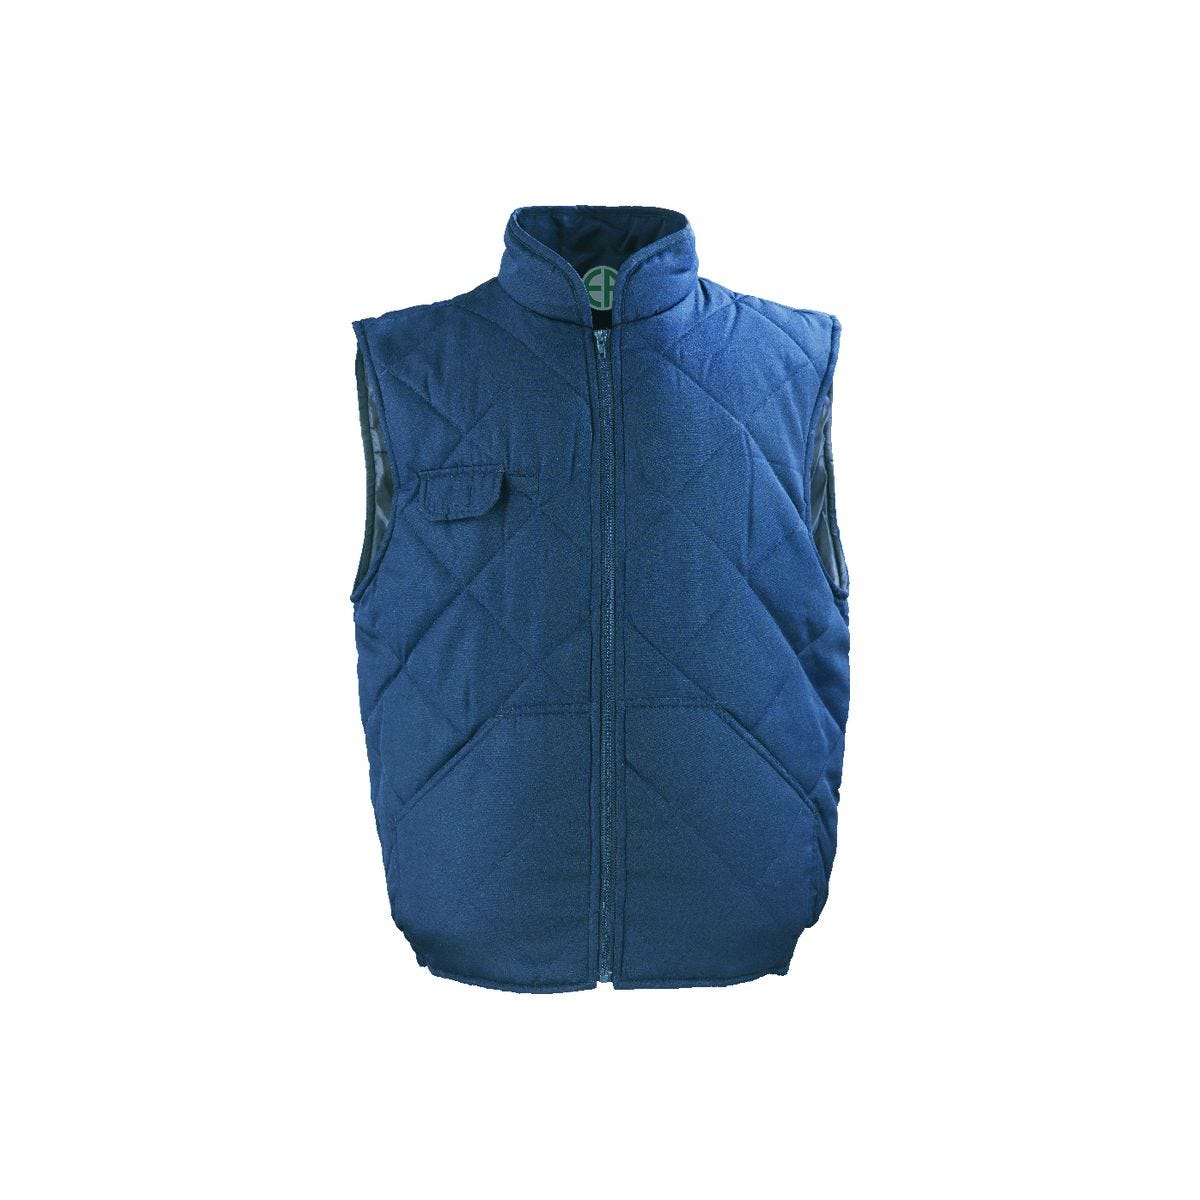 CHOUKA Gilet Froid marine, 65%PES/35%CO + Matelassage 180g/m² - COVERGUARD - Taille XL 0